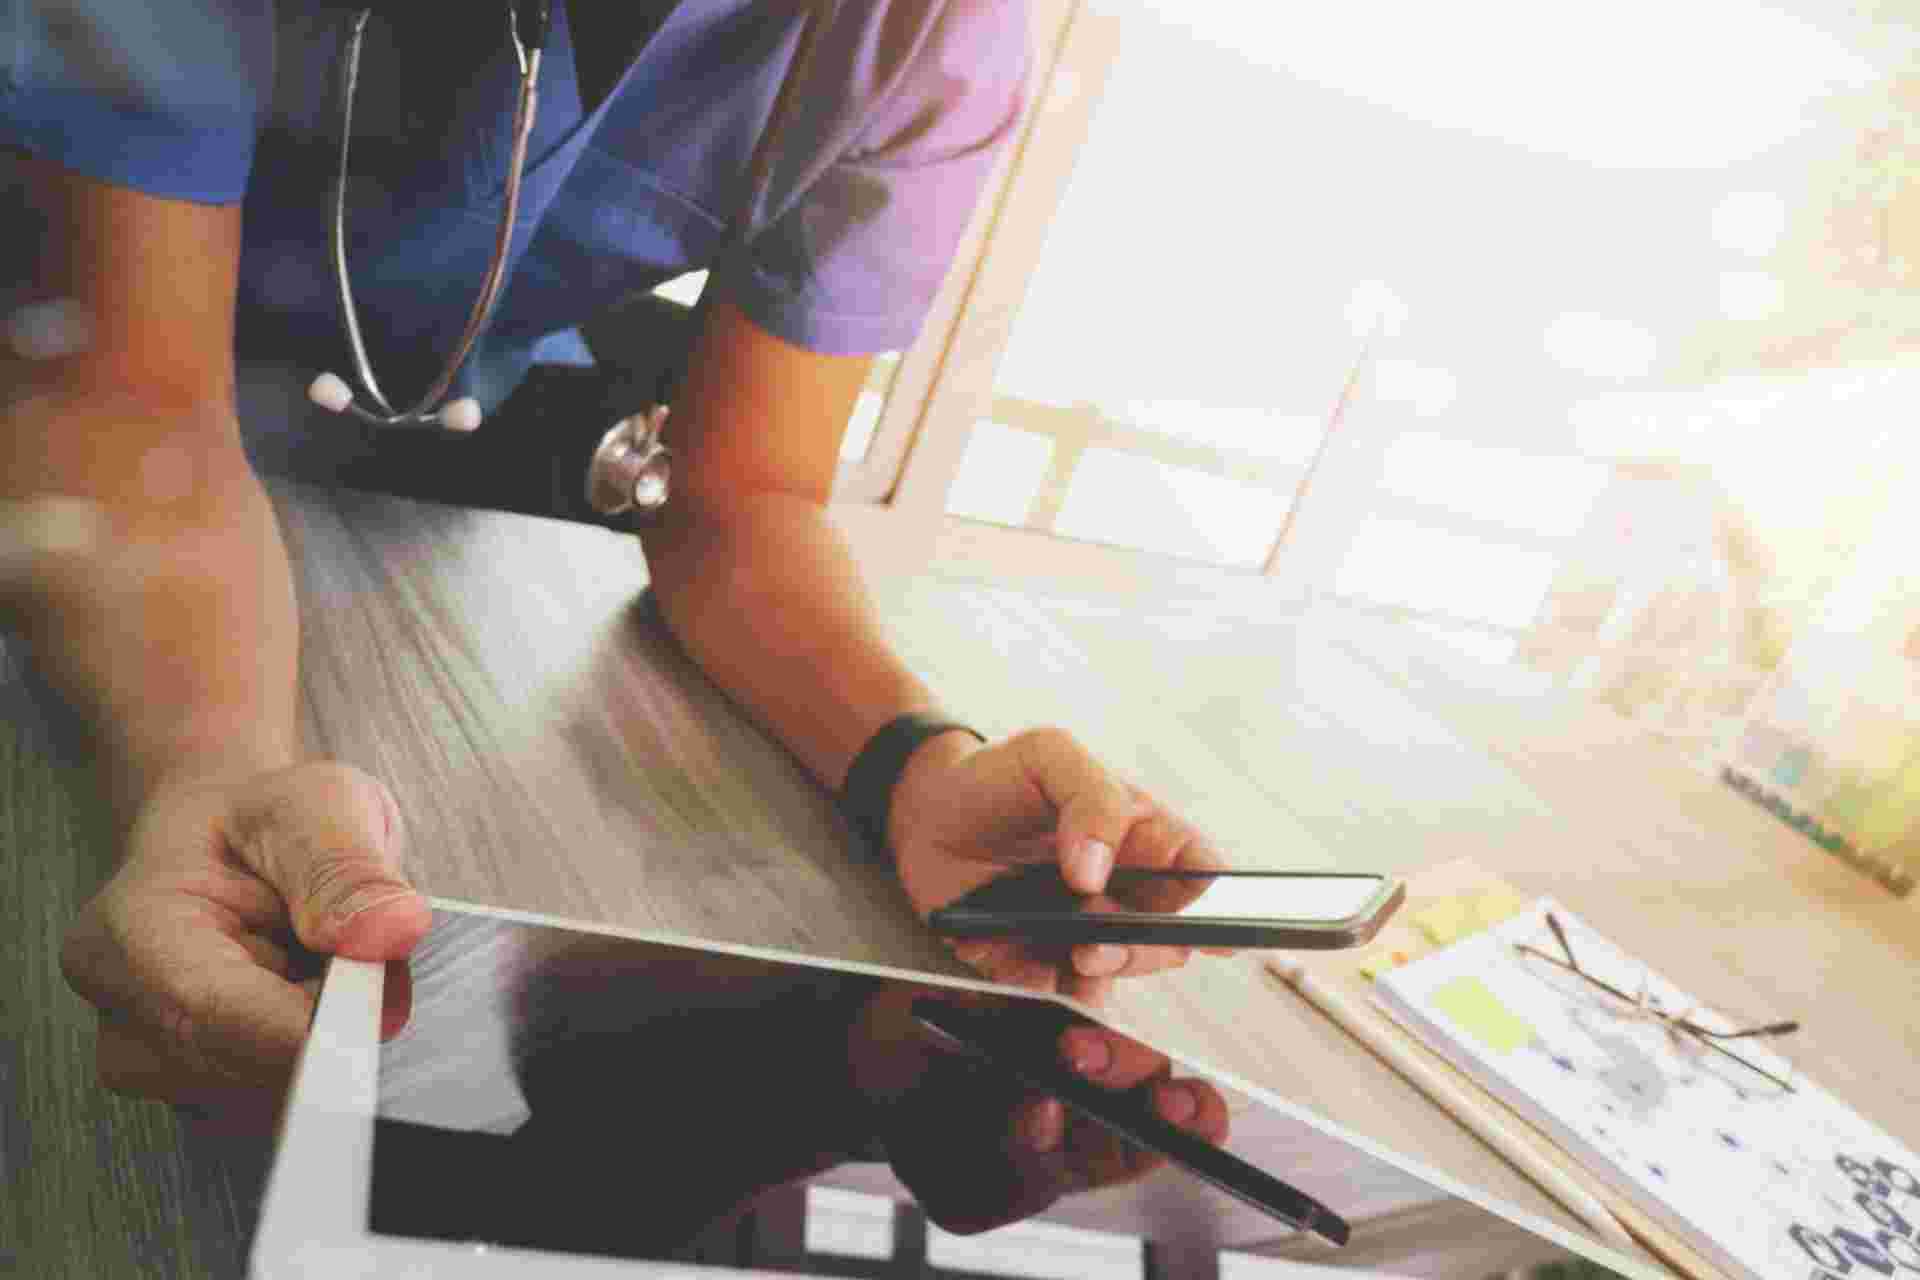 Private GP provider use Docman Connect to improve patient care